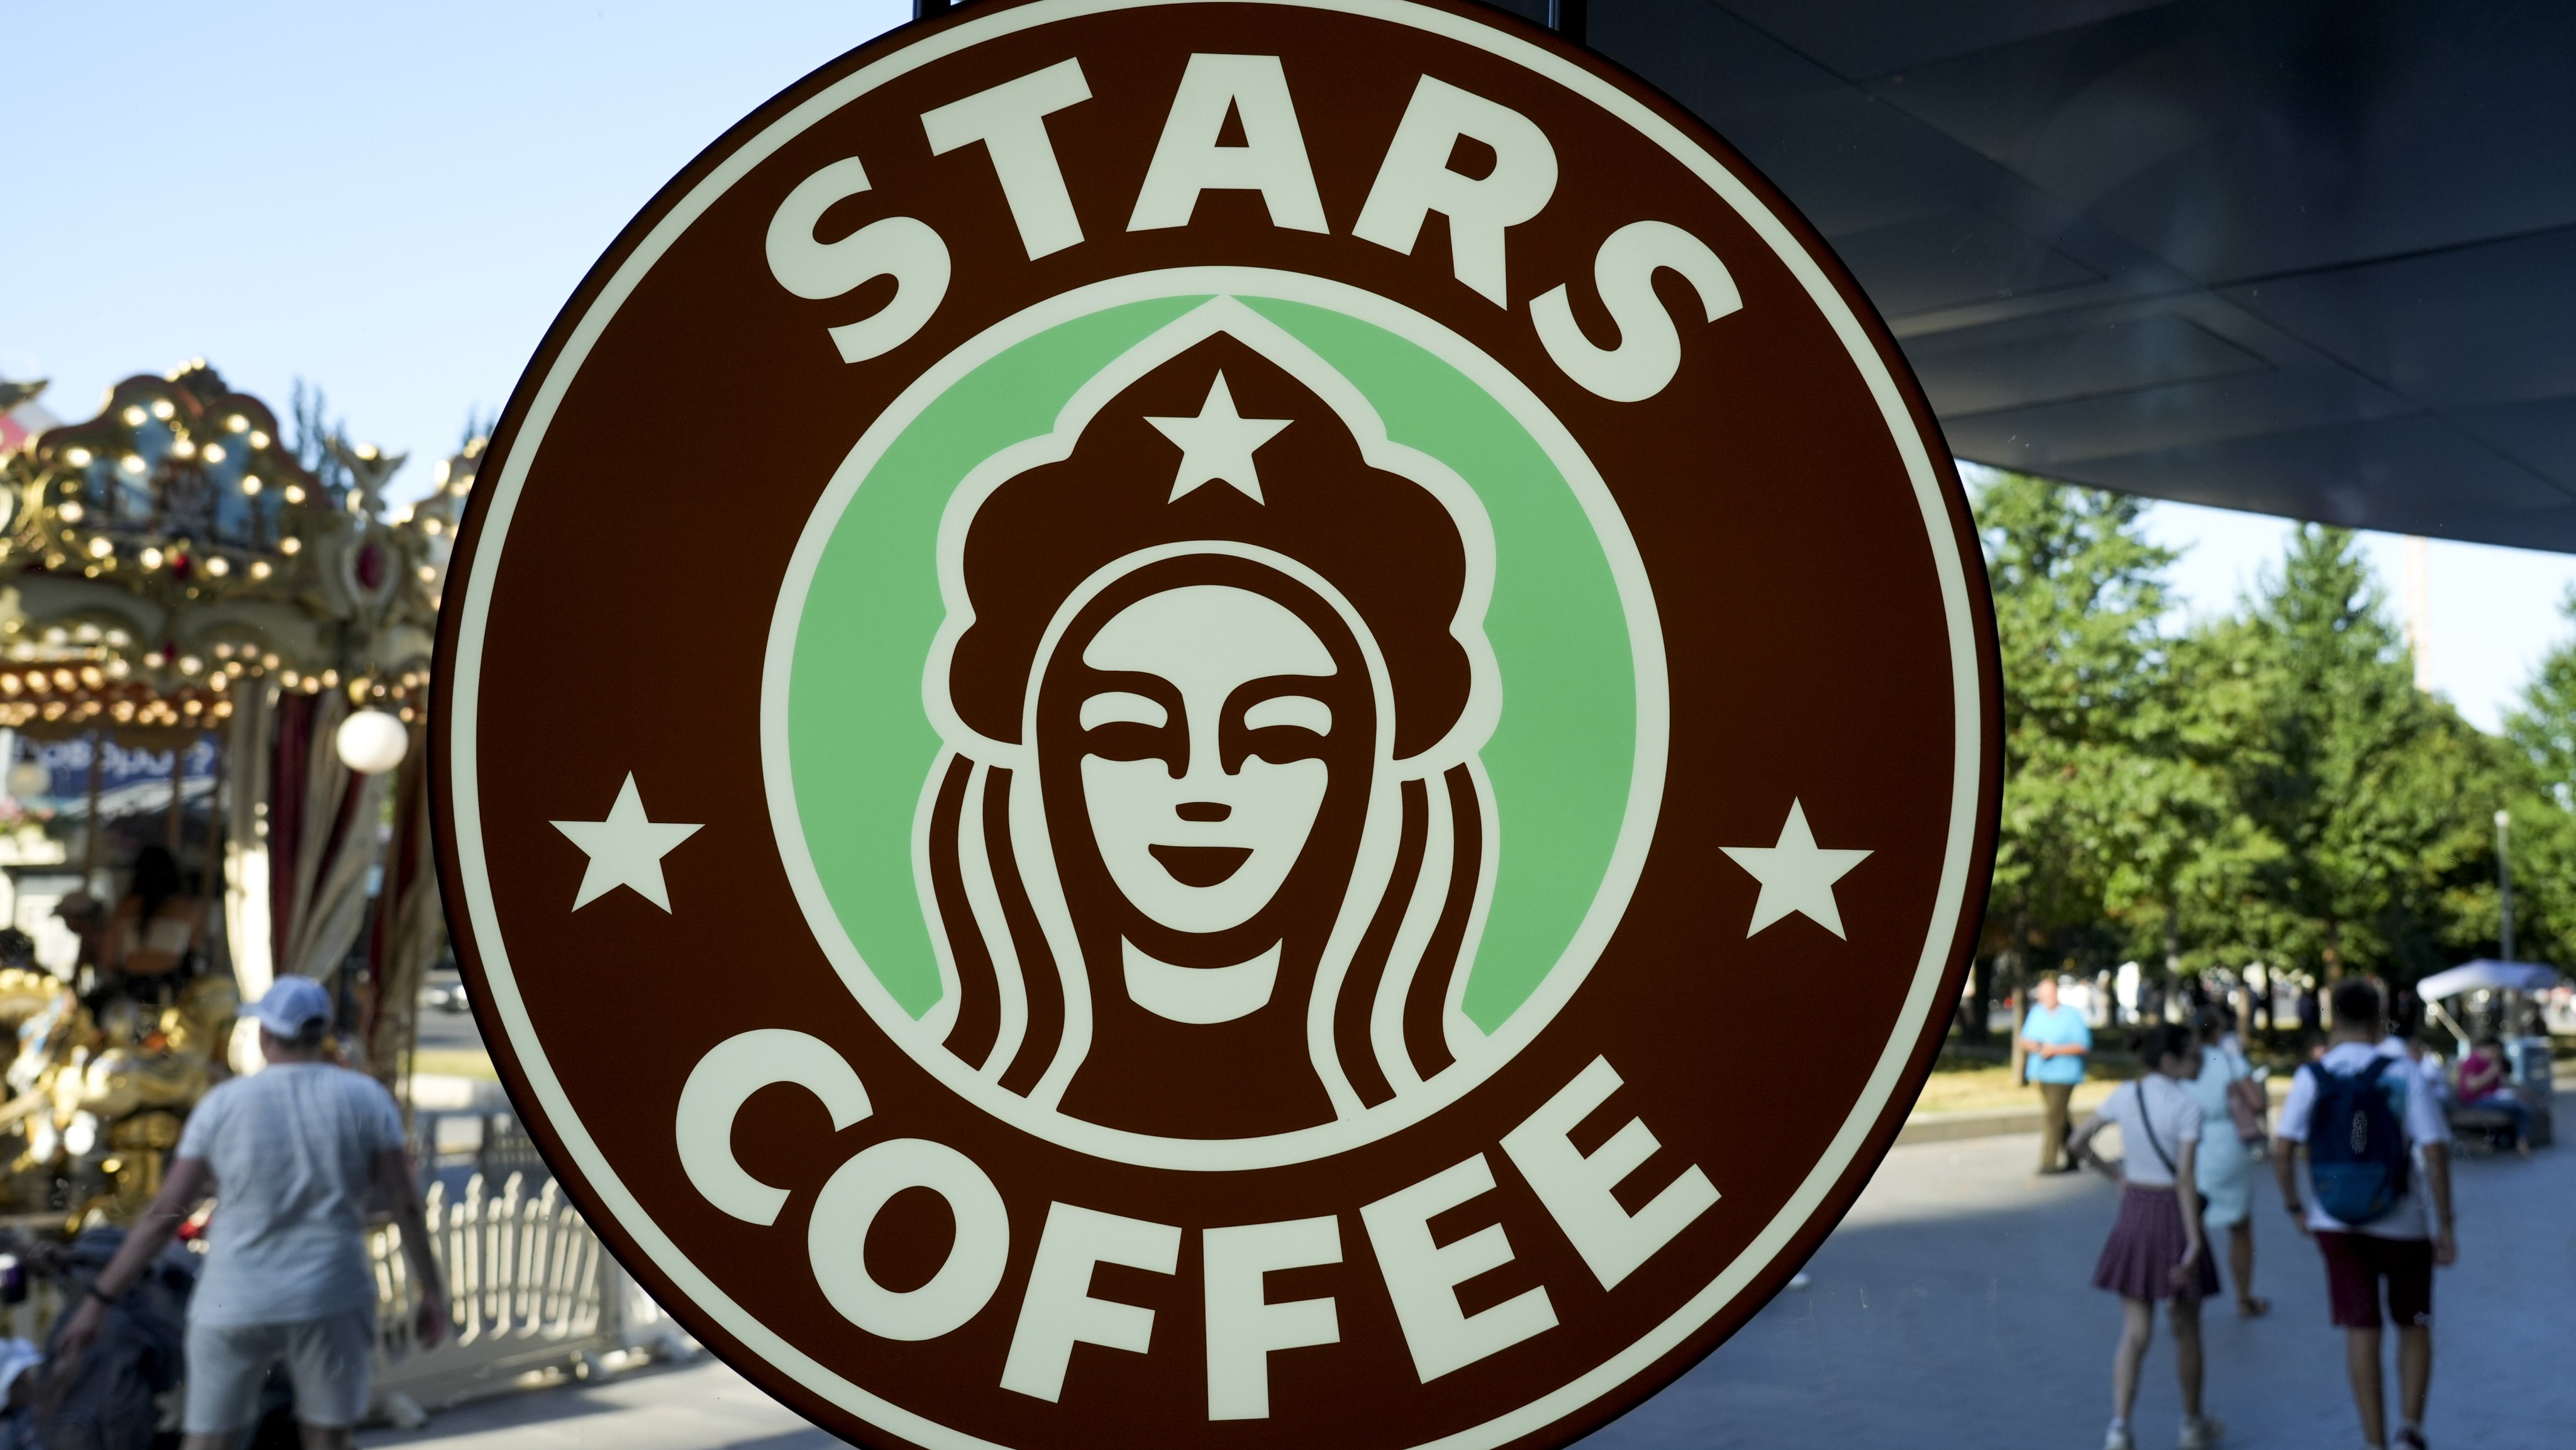 Former Starbucks coffee shops reopened as Stars Coffee in Russia